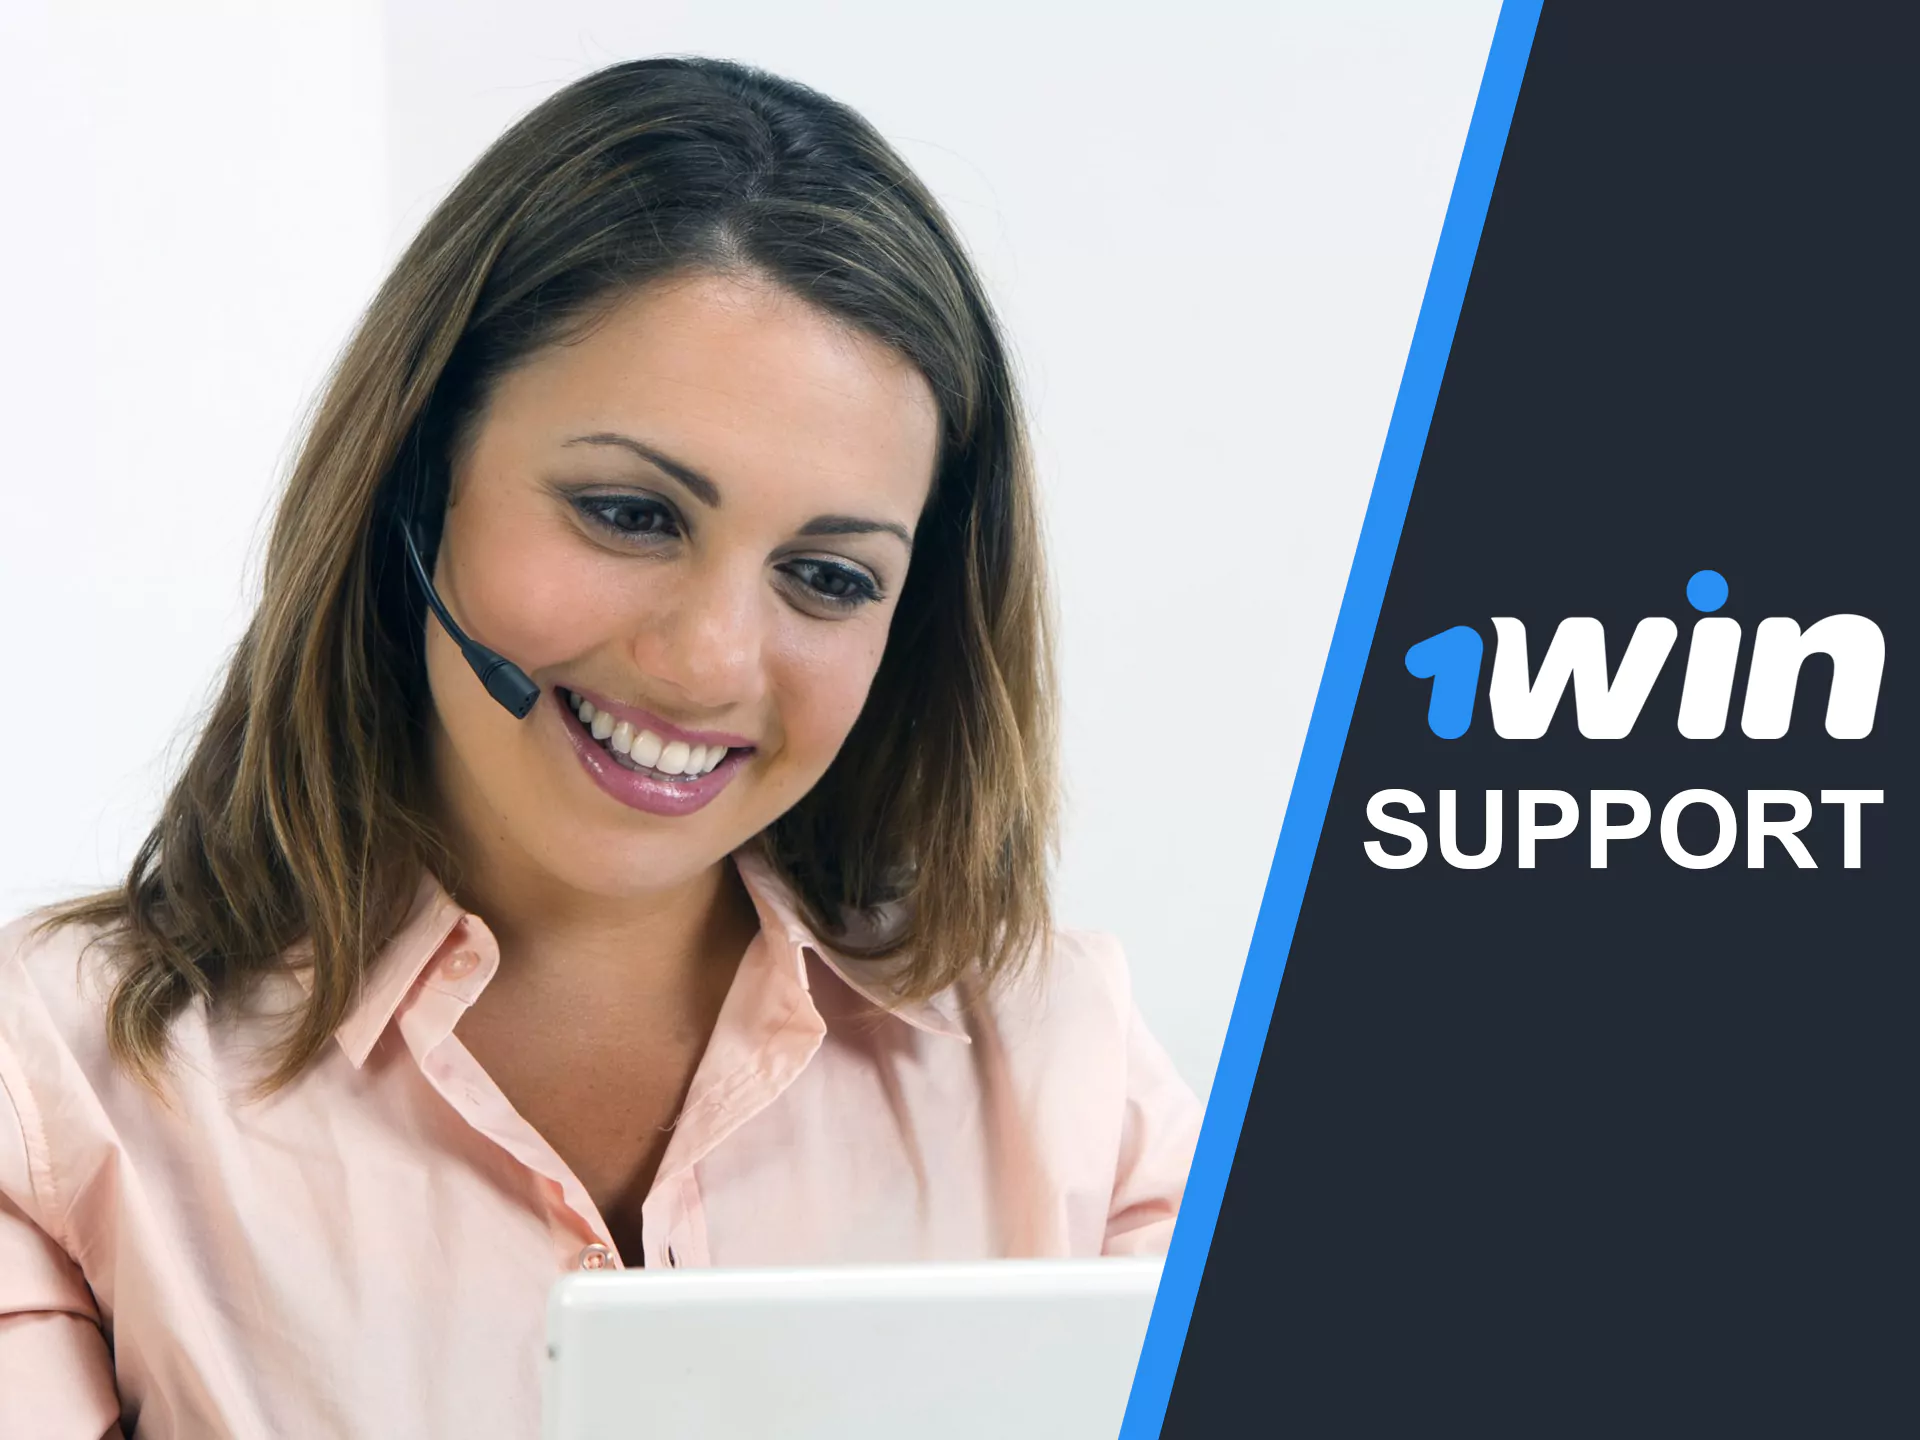 Ask 1win support for help.